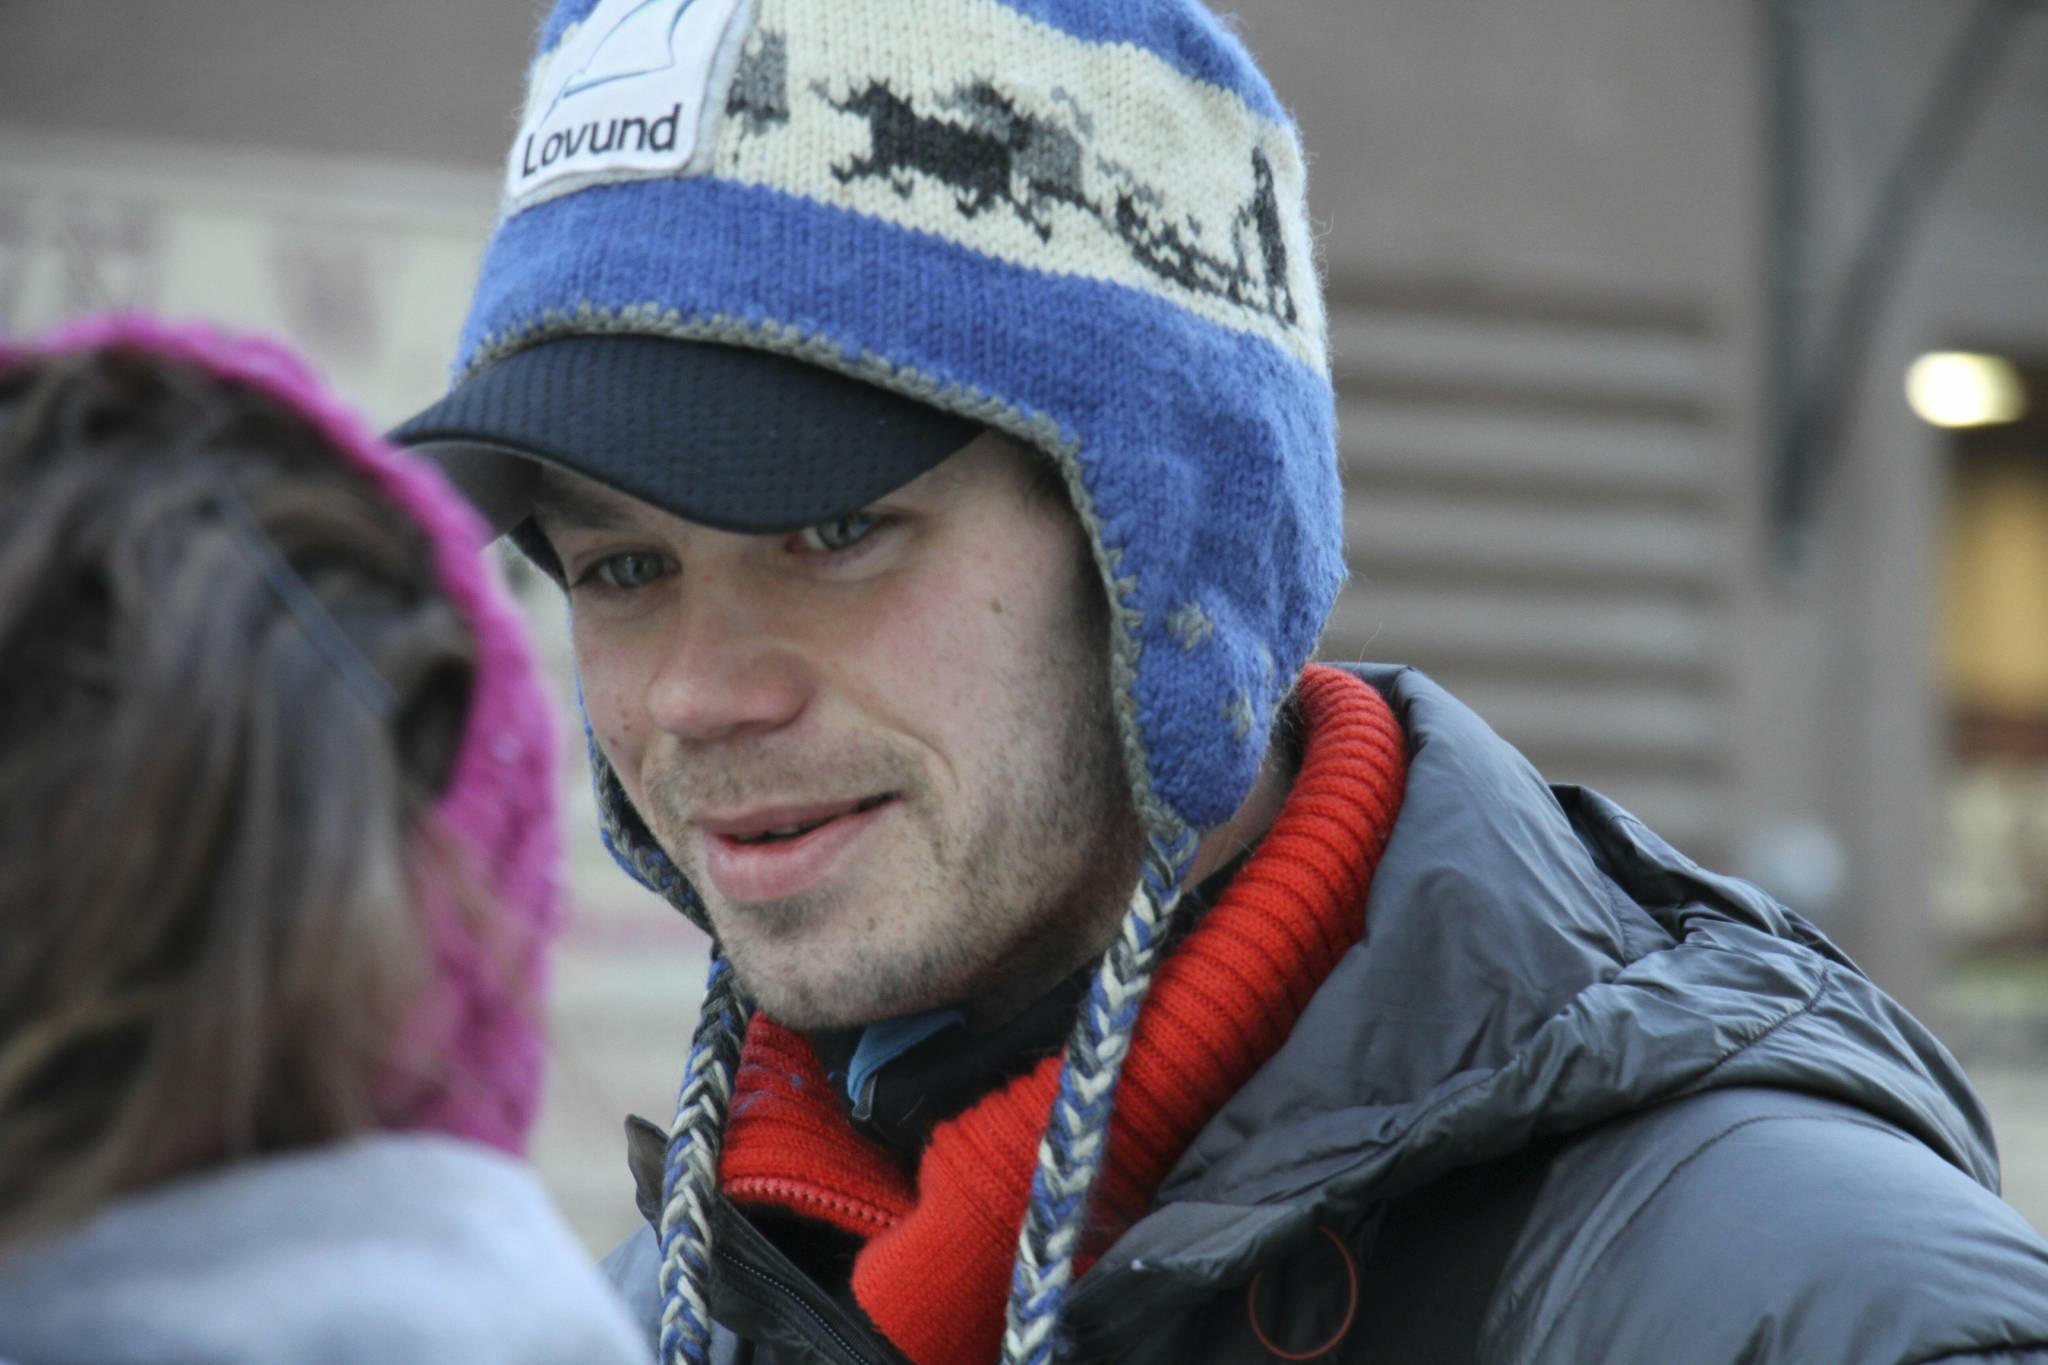 Iditarod Trail Sled Dog Race defending champion Joar Ulsom, of Norway, talks to fans before the ceremonial start of this year’s race Saturday, March 2, 2019, in Anchorage, Alaska. Ulsom and 51 other mushers will officially start the race Sunday, March 3, 2019, in Willow, Alaska. (AP Photo/Mark Thiessen